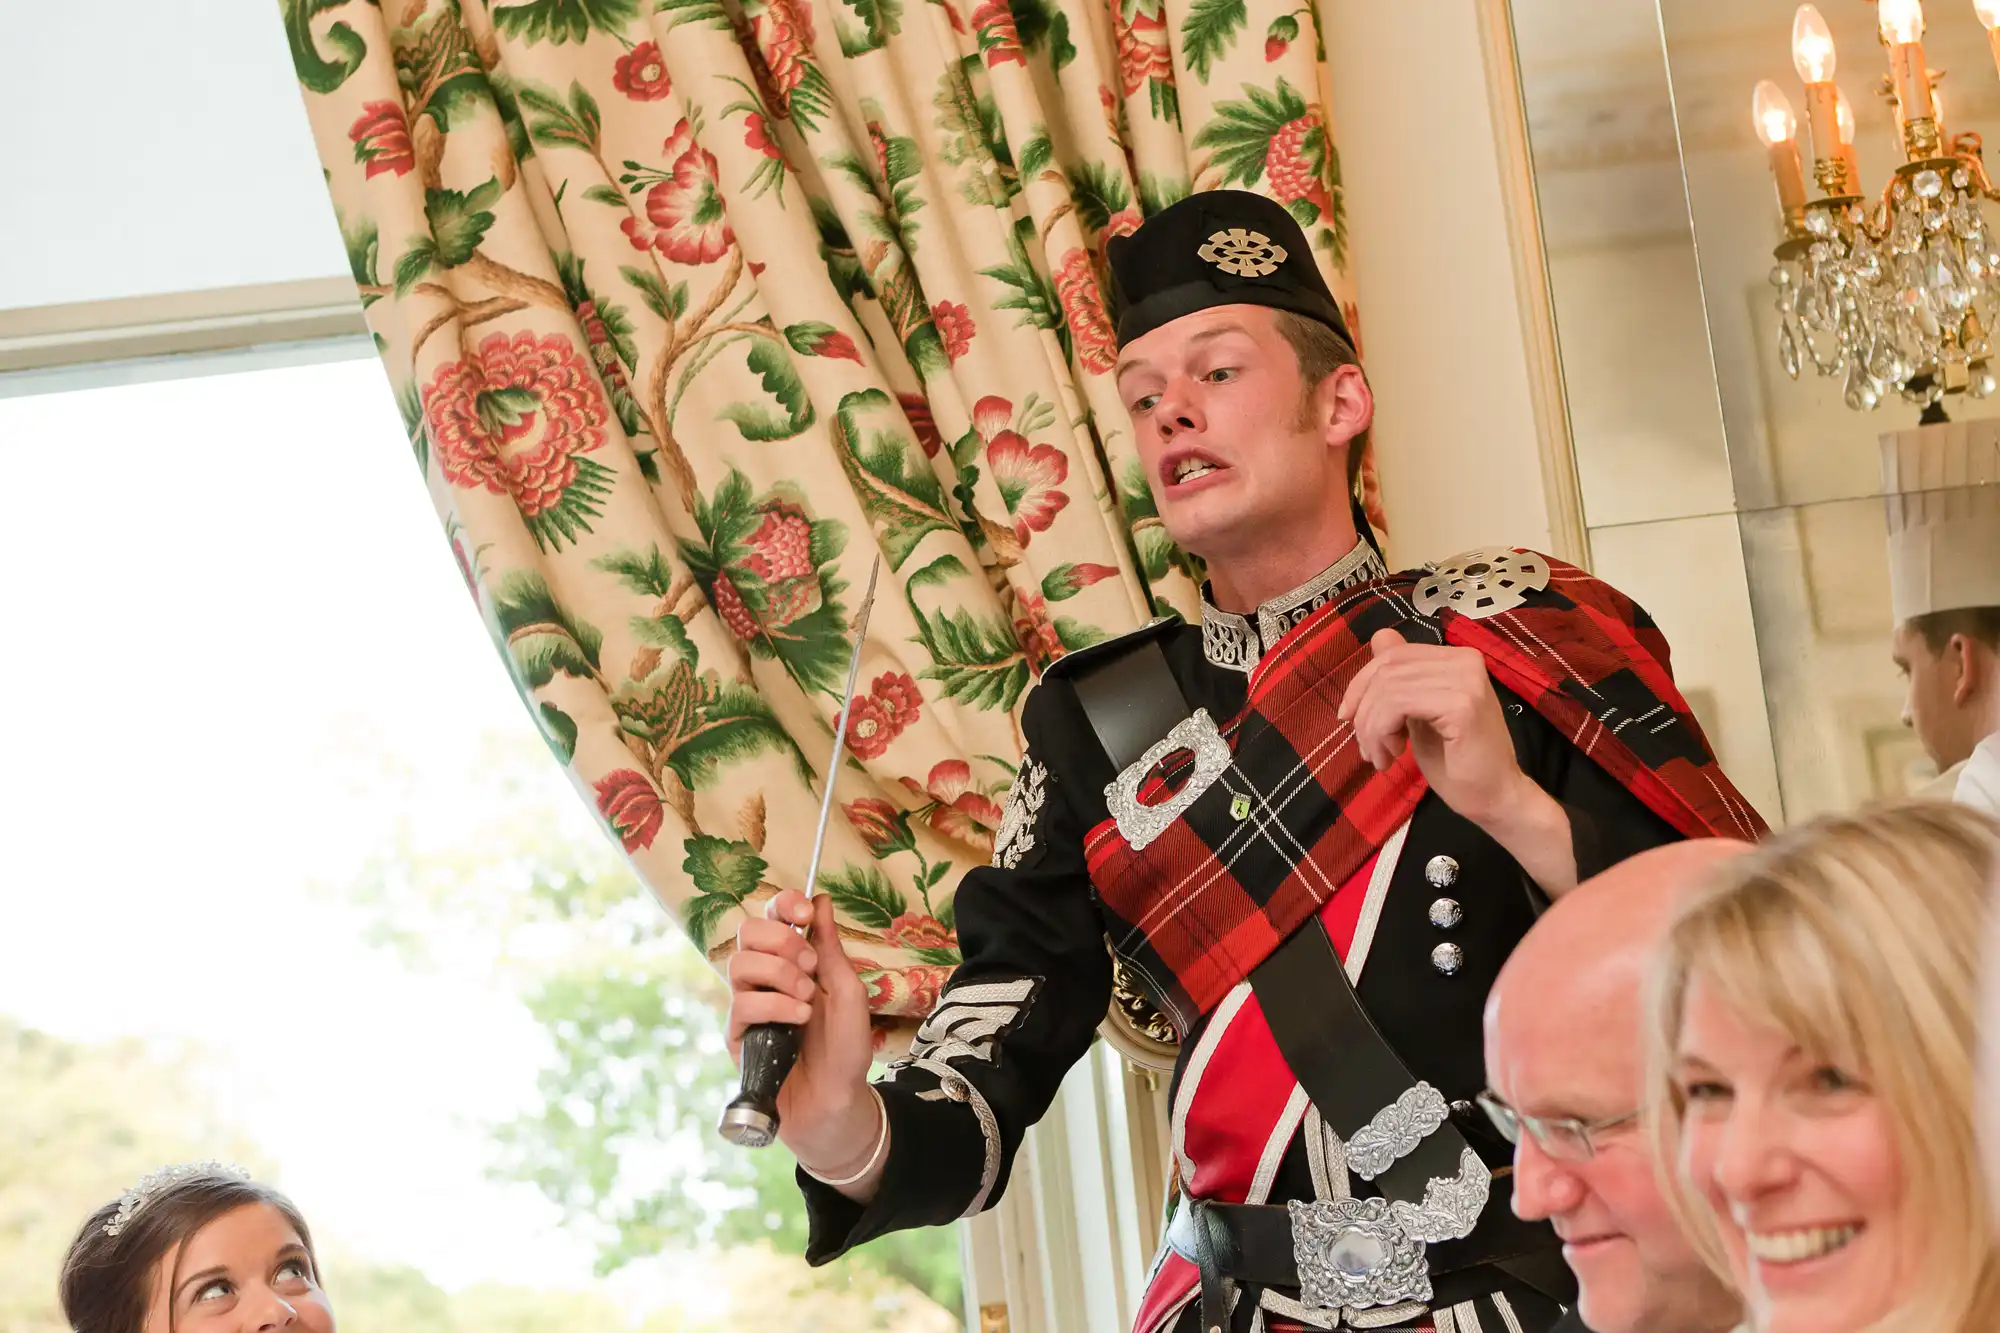 Man in traditional scottish attire playing bagpipes indoors at an event, surrounded by seated guests.